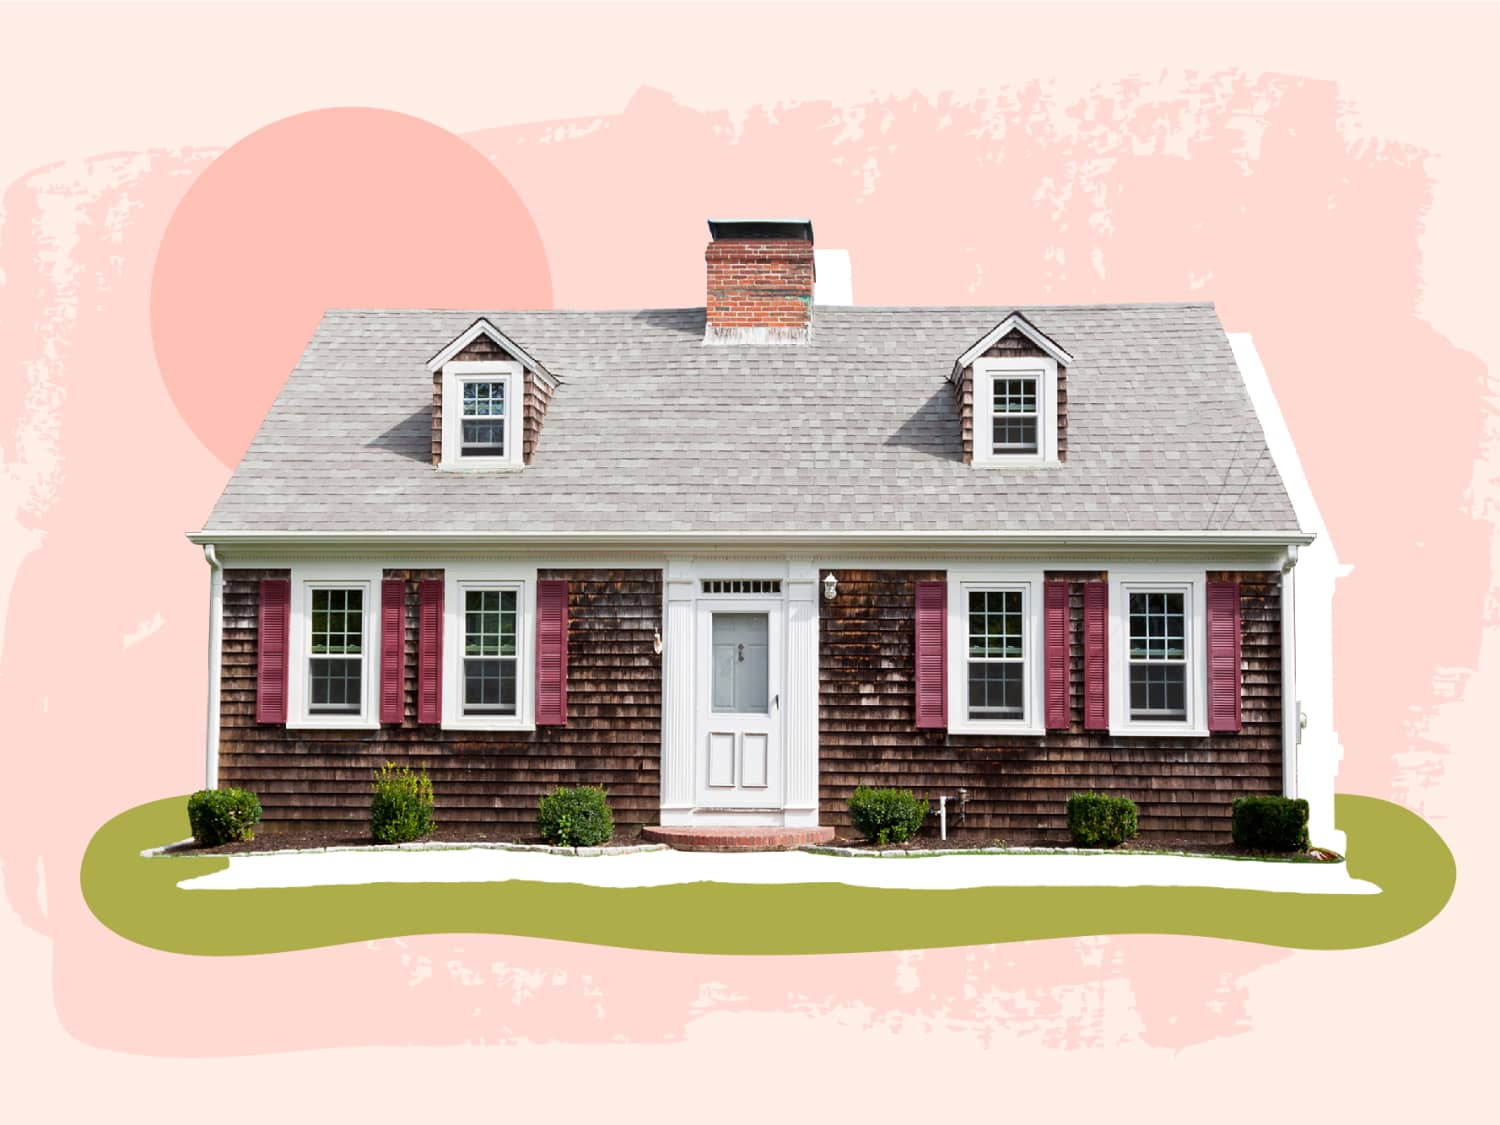 What Is Cape Cod Architecture?